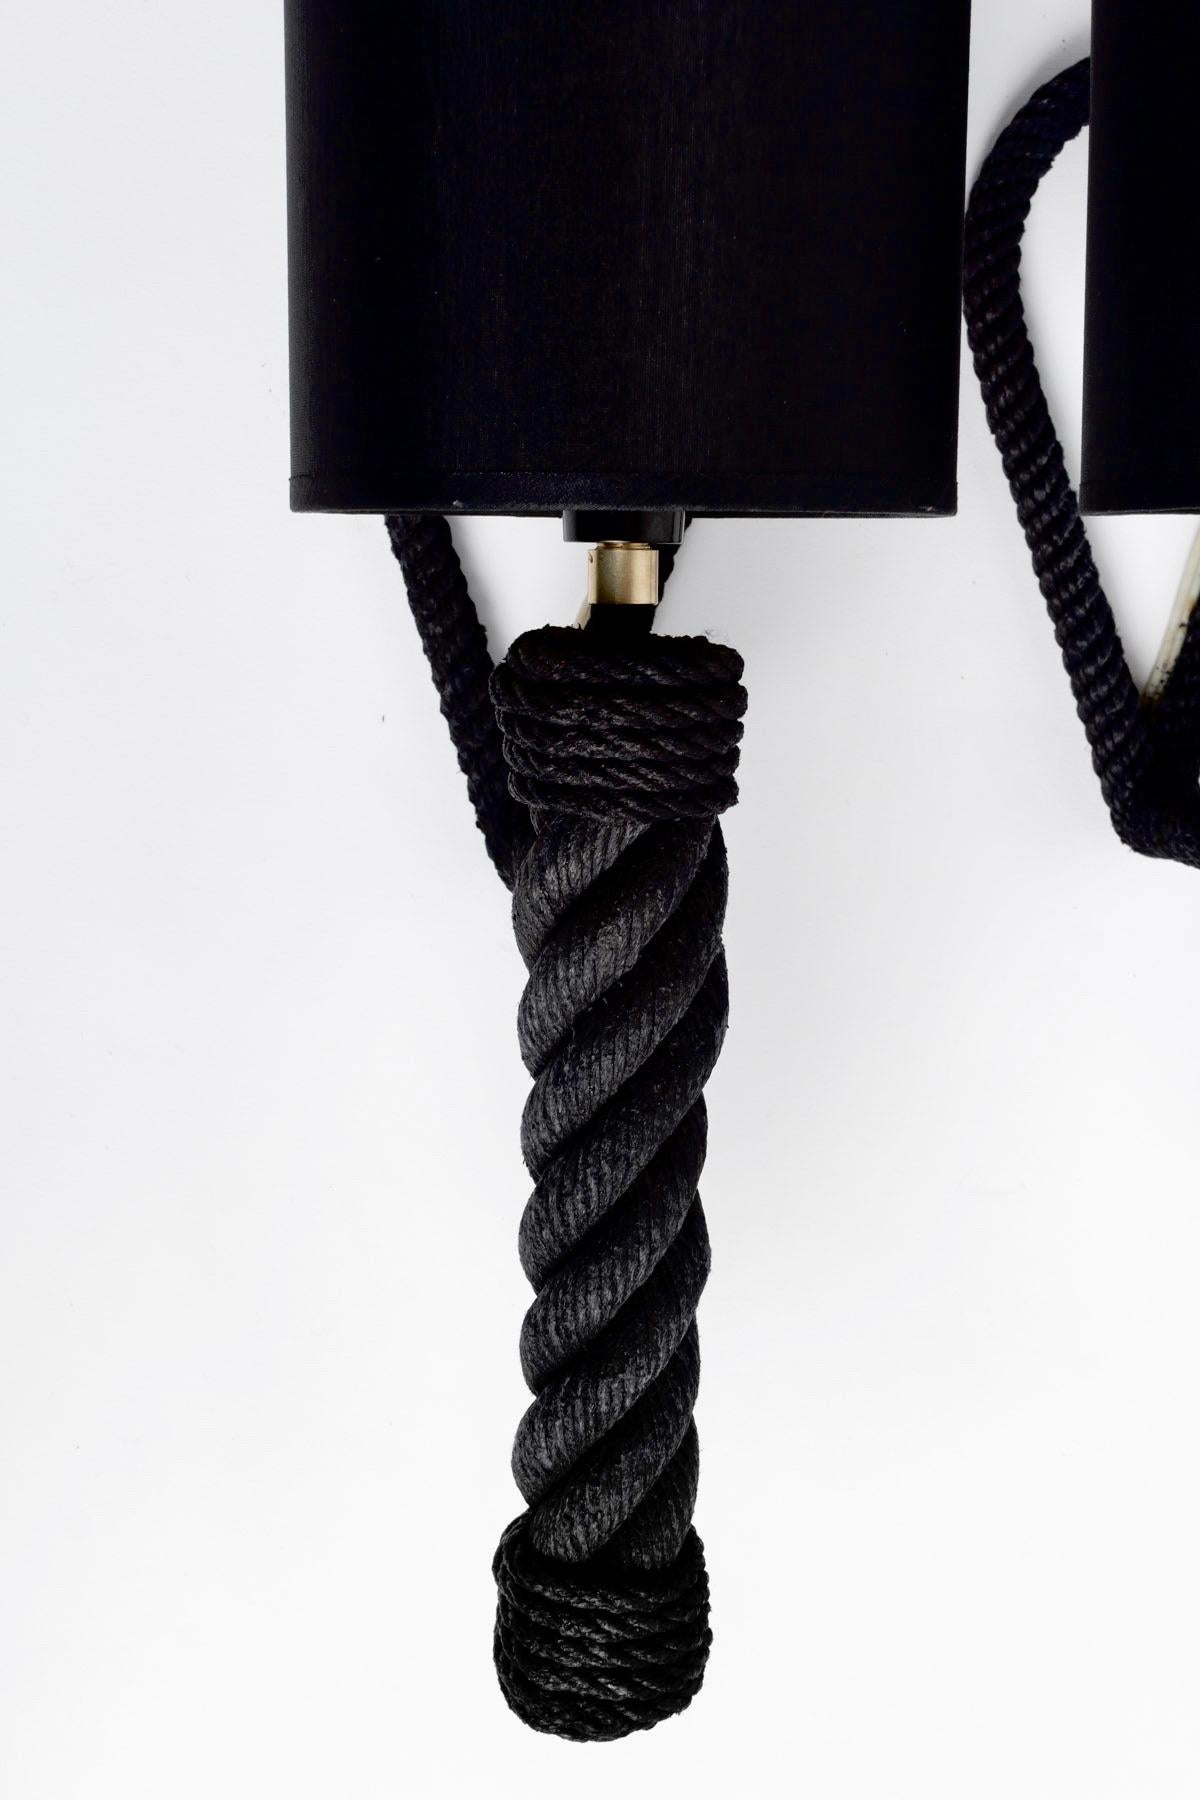 Composed of a rope arm of round section adorned with a wall attachment forming a loop and dressed with a cylindrical black cotton lampshade enhanced at the base of the torch with a gilded brass ring.

It is not the original color.
The rope of the